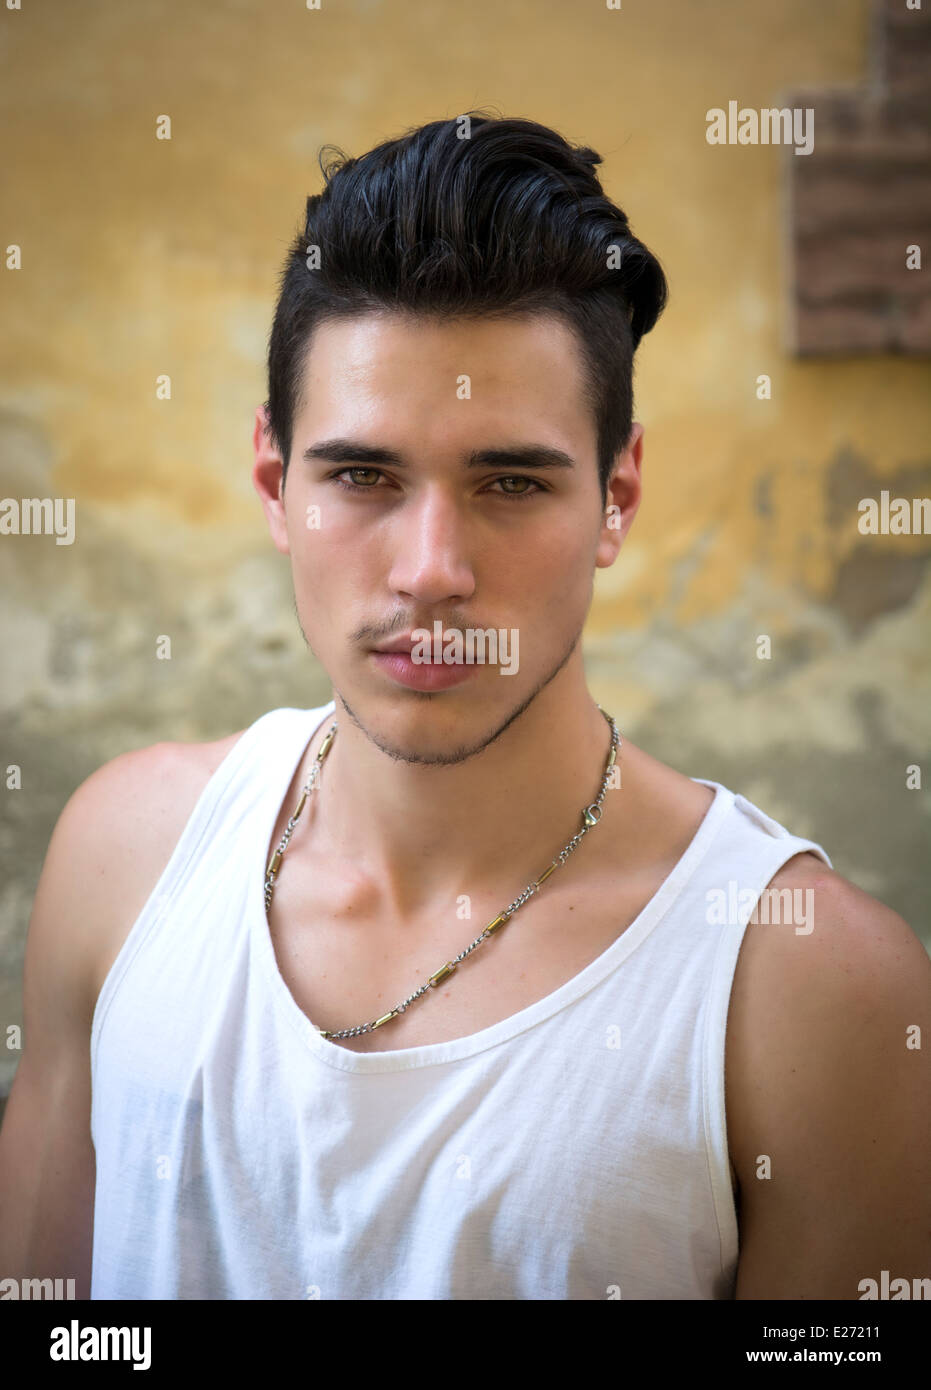 Headshot of attractive black haired young man outside, looking at camera Stock Photo